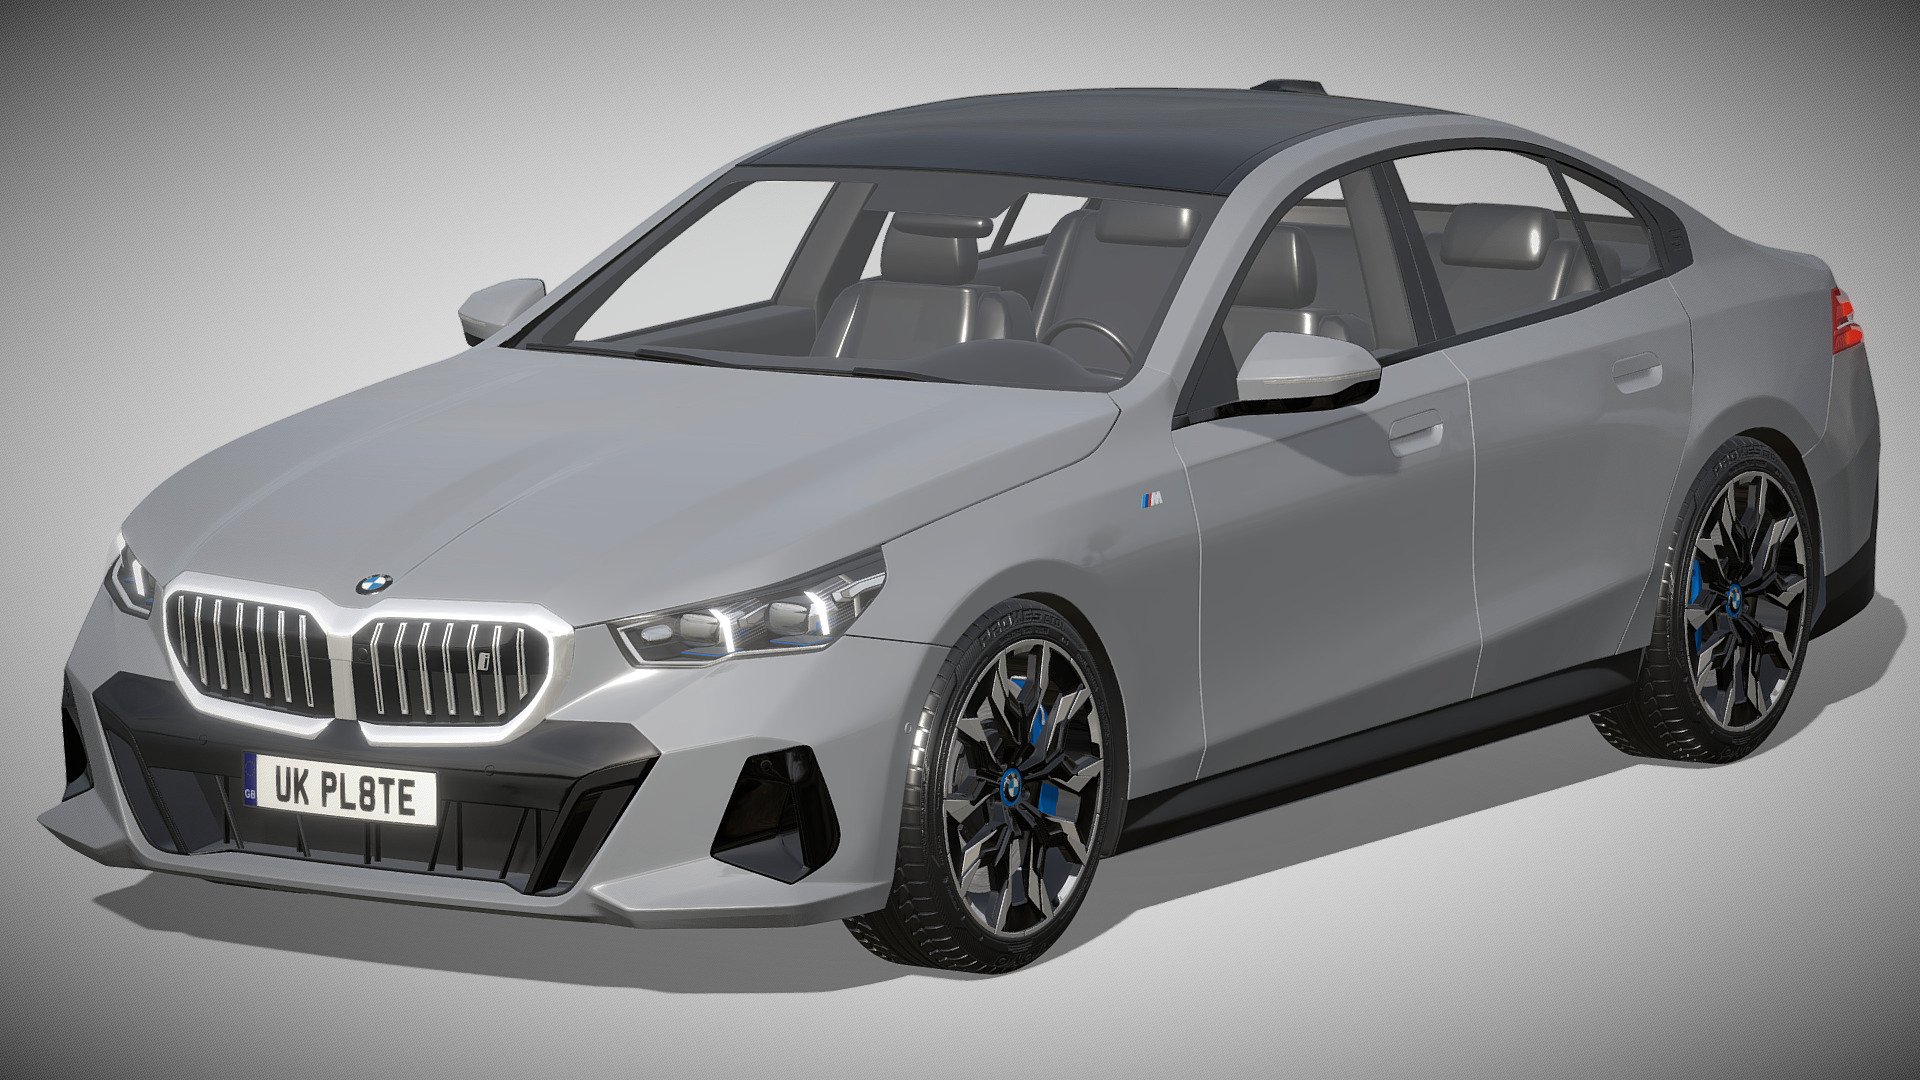 BMW i5 G60 2024

https://www.bmw.de/de/neufahrzeuge/bmw-i/i5/bmw-i5-ueberblick.html

Clean geometry Light weight model, yet completely detailed for HI-Res renders. Use for movies, Advertisements or games

Corona render and materials

All textures include in *.rar files

Lighting setup is not included in the file! - BMW i5 G60 2024 - Buy Royalty Free 3D model by zifir3d 3d model